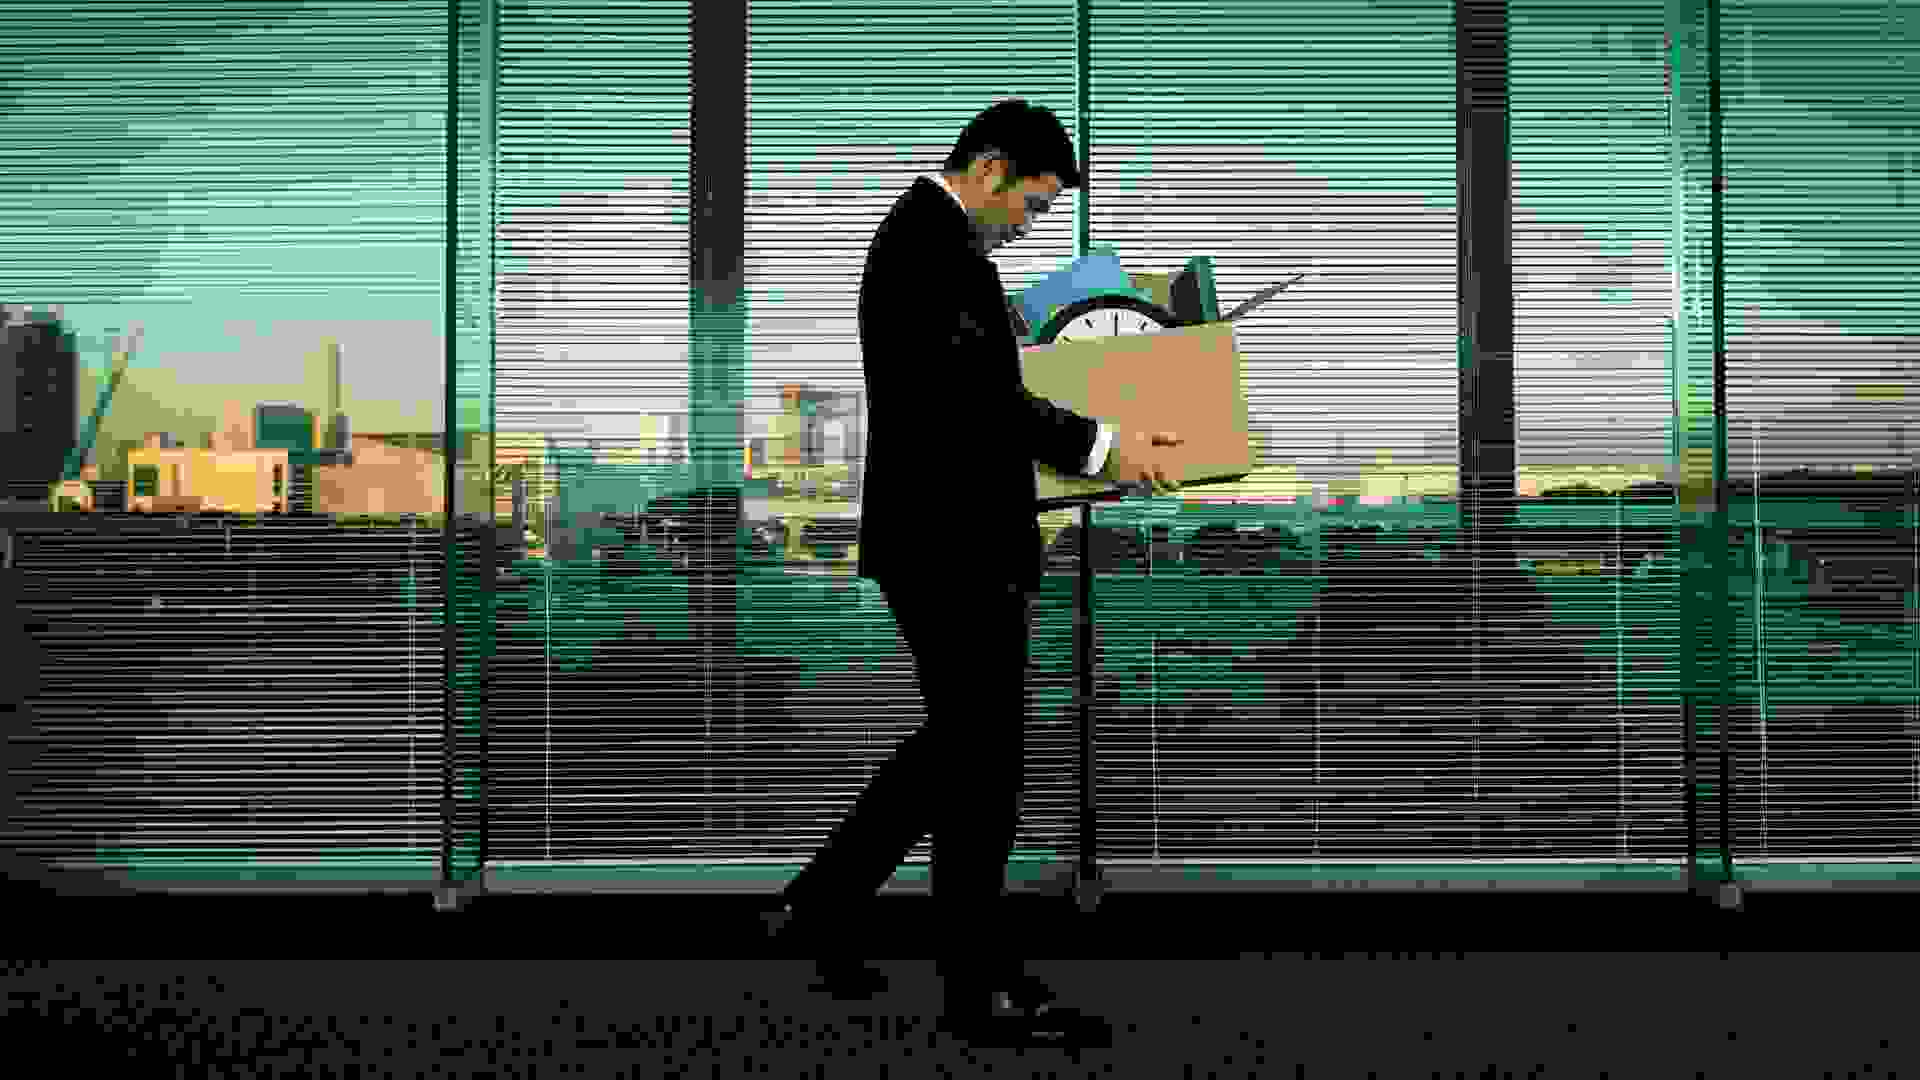 Subject: A Japanese business office worker leaving his job with all his belonging in a layoff and economic recession.